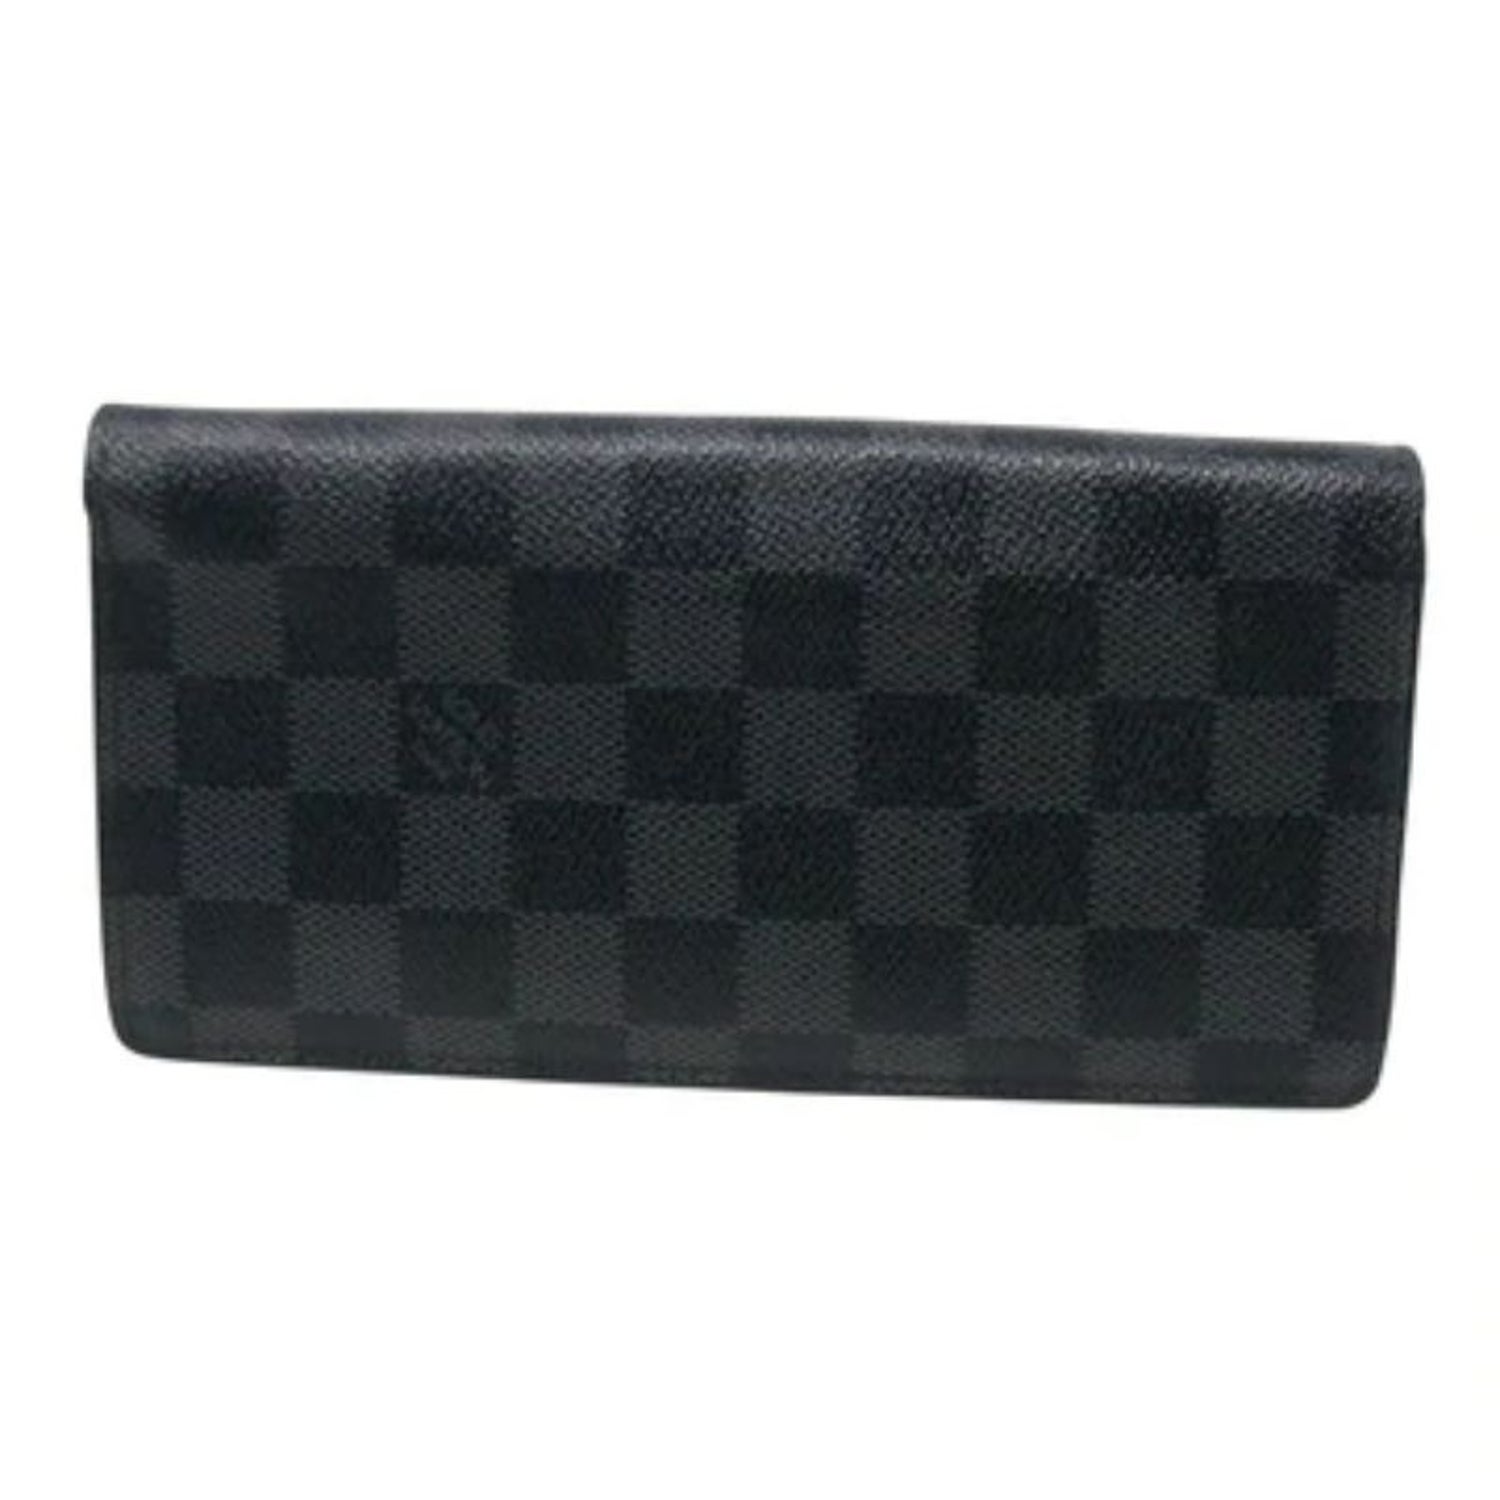 Louis Vuitton Mens Wallet Organizer - 2 For Sale on 1stDibs